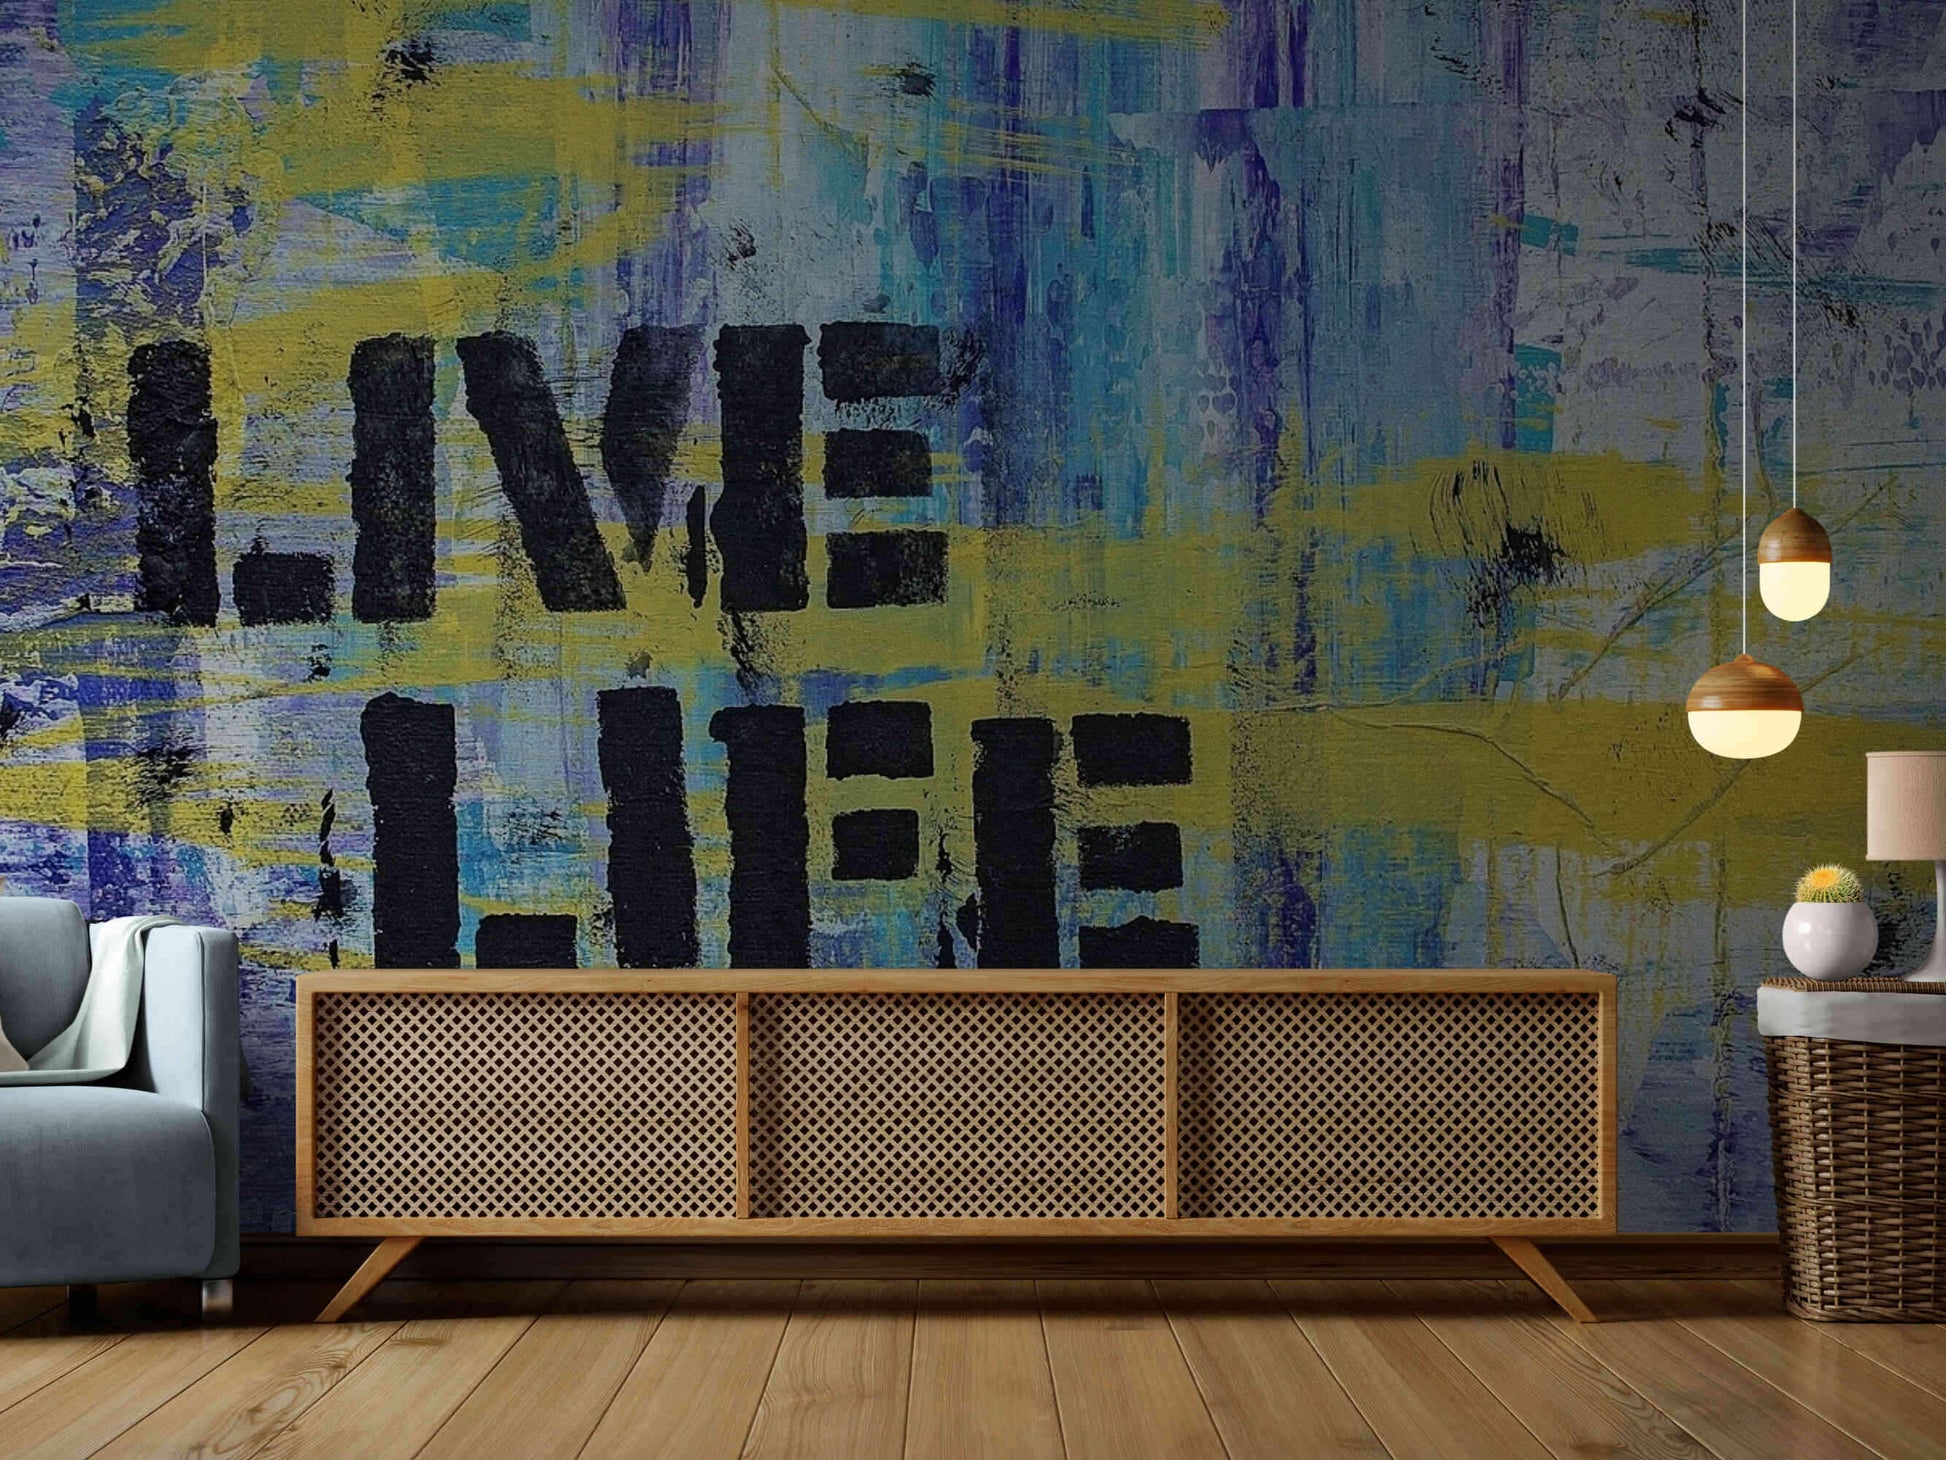 Motivational graffiti art with 'Live' boldly written on a dynamic blue and yellow background.